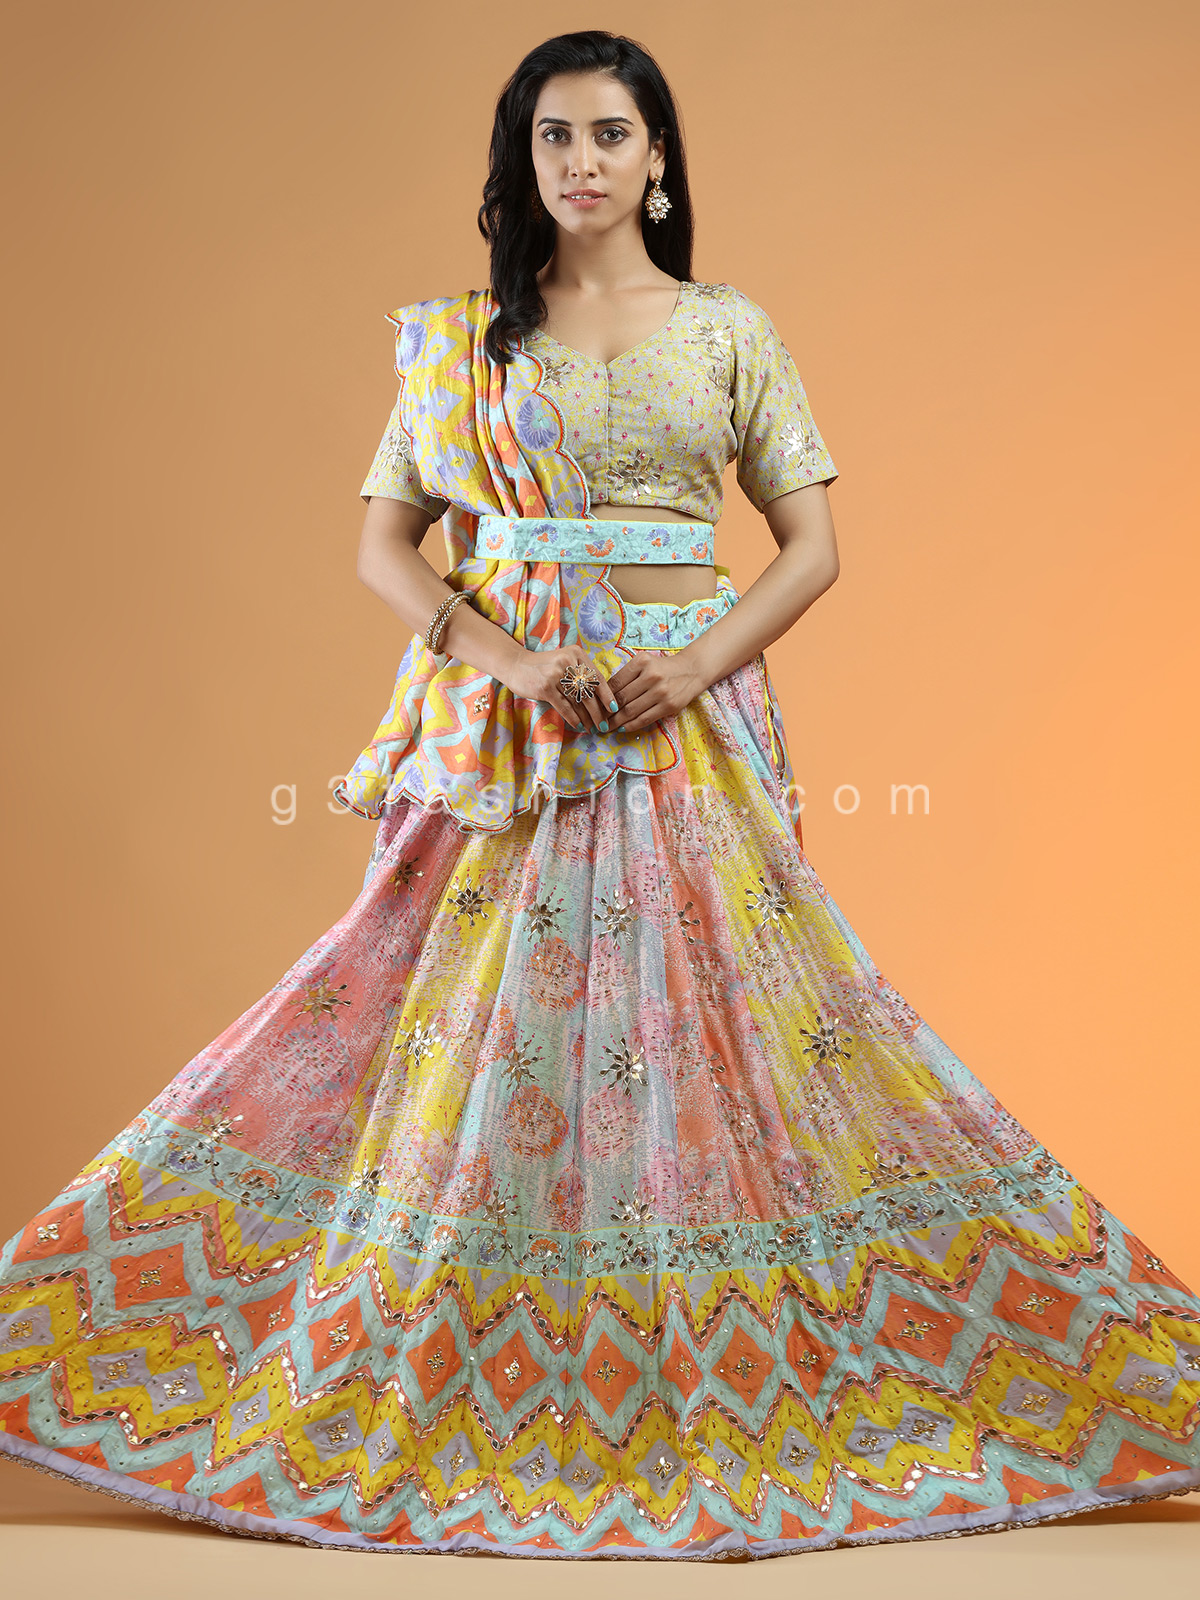 G3 Surat - Get ready for party and reception with these beautiful gowns  from G3+ fashion. 🔷 Click to Shop Online: https://bit.ly/3JR7wst 🔷 Book  Appointment to Shop via Video call: https://bit.ly/3bONimT 🔷